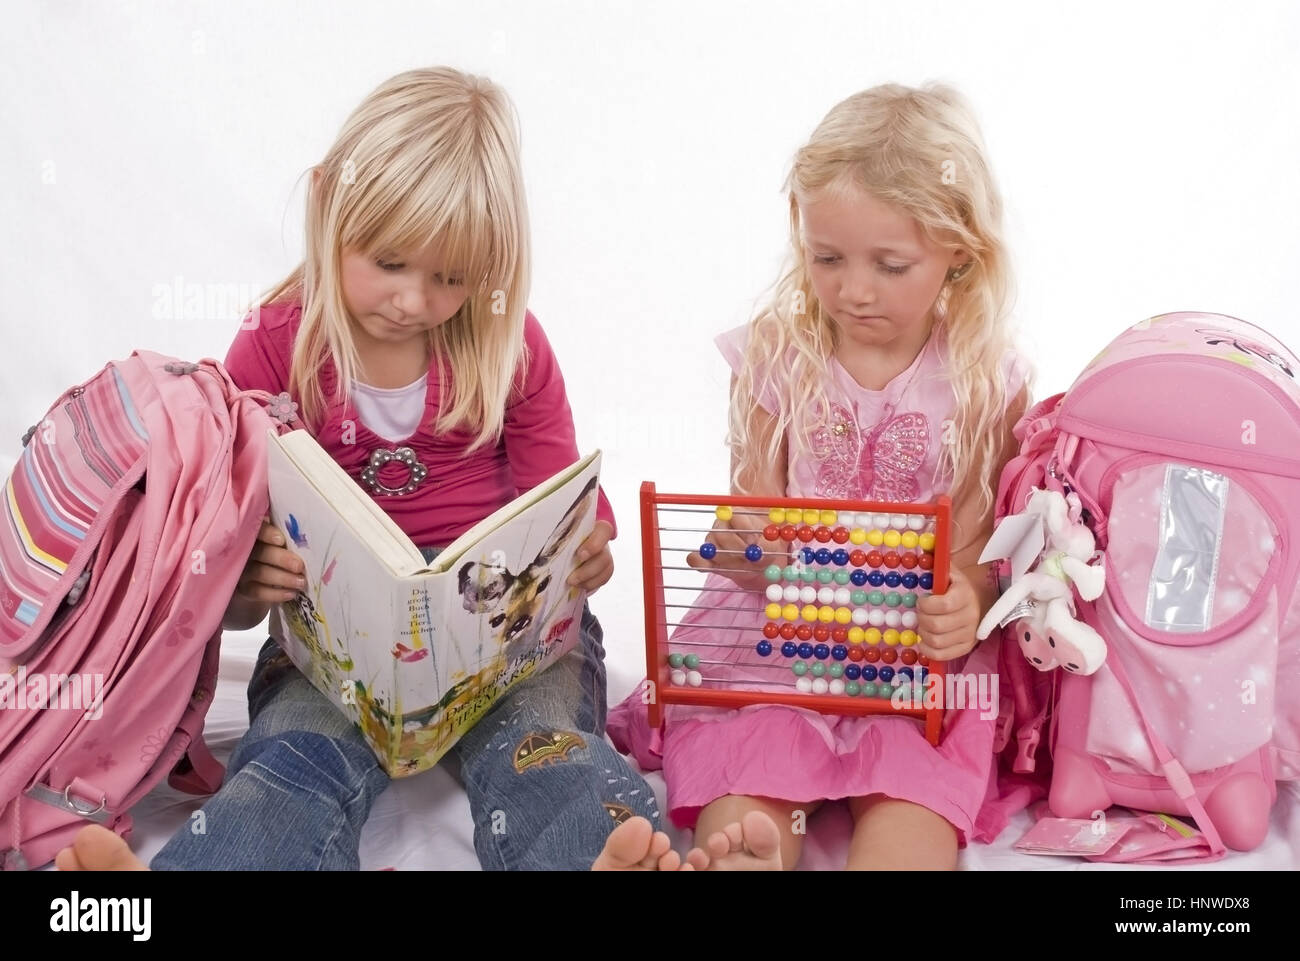 Model release, Zwei Schulmaedchen mit Lesebuch und Abakus - two schoolgirls with book and abacus Stock Photo